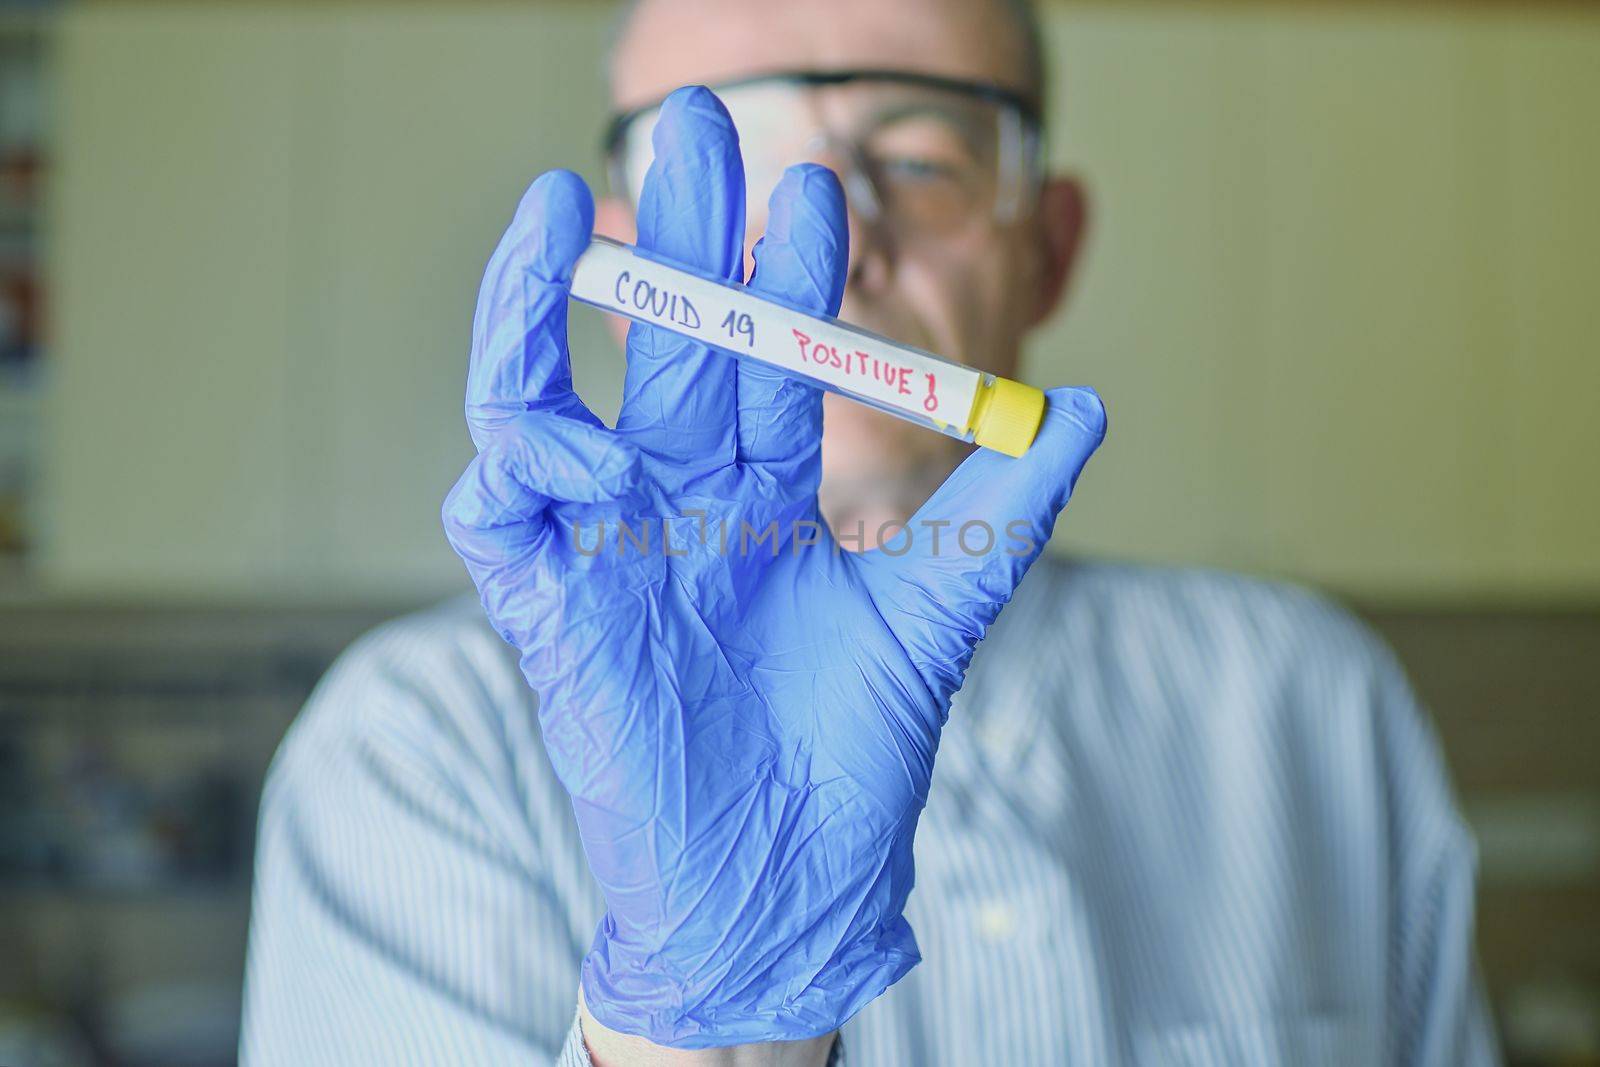 The sample of Covid 19 in the test tube. Doctor - epidemiologist holding thesample tube with sample of coronavirus. by roman_nerud